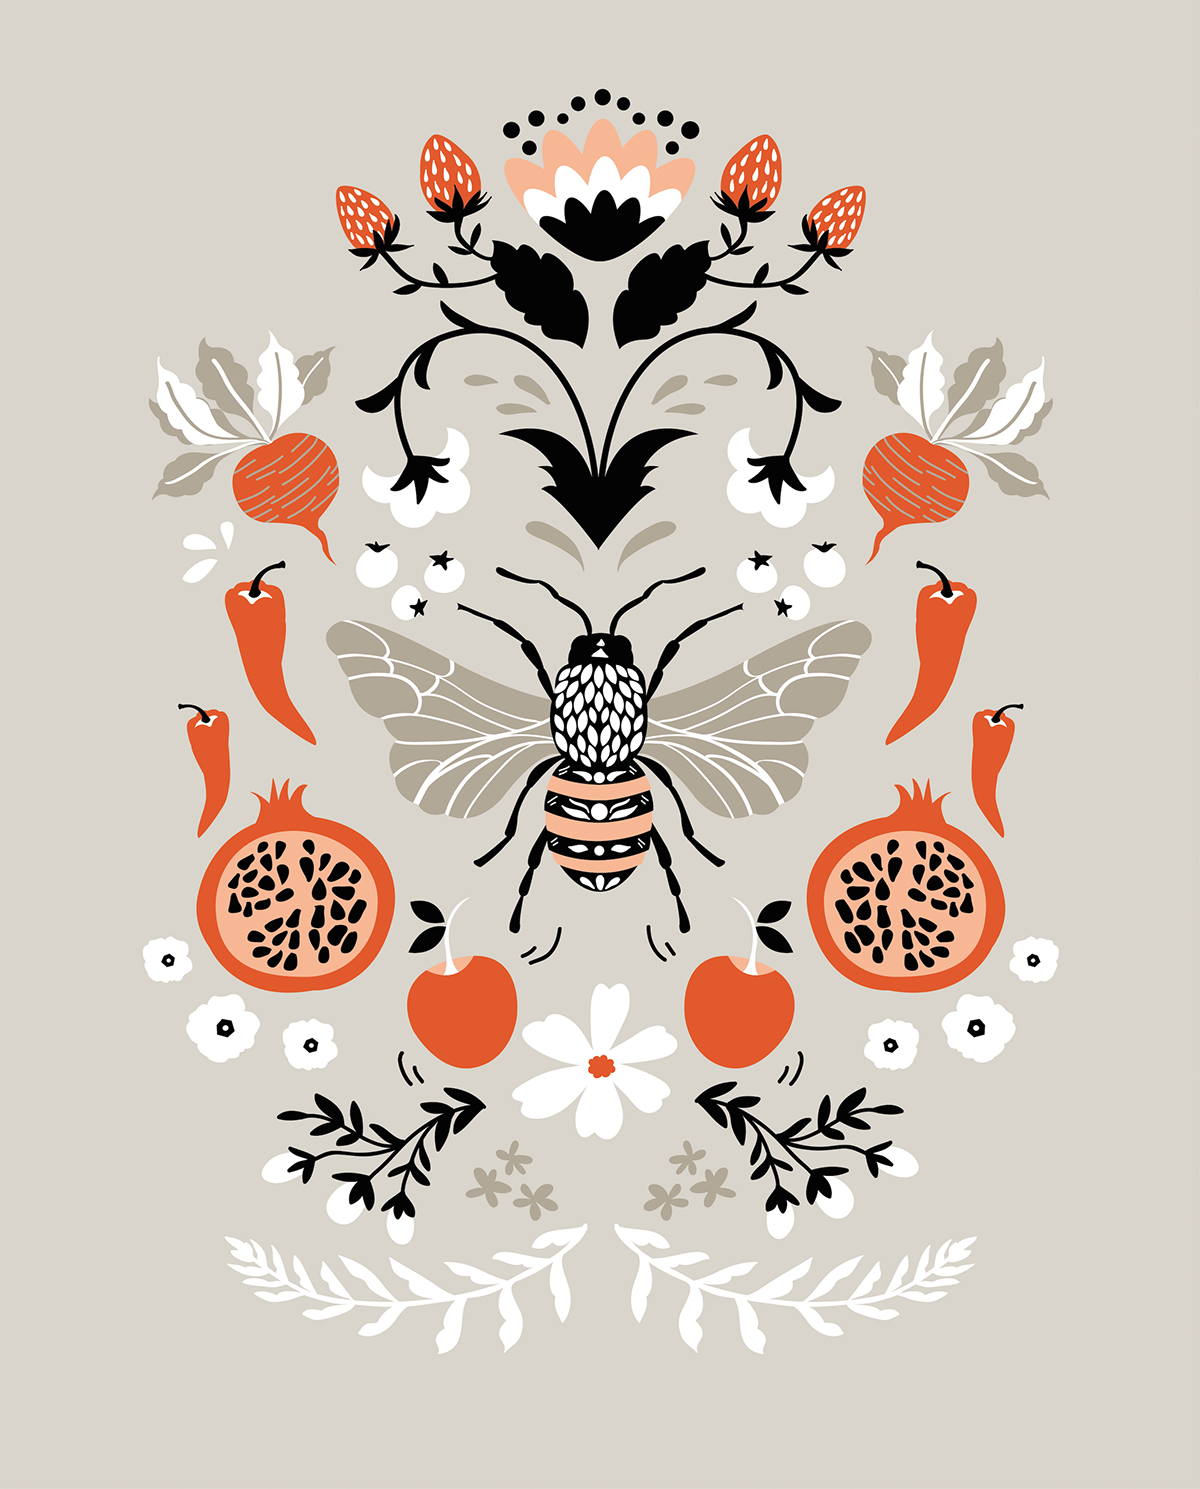 Nature graphic limited color pattern